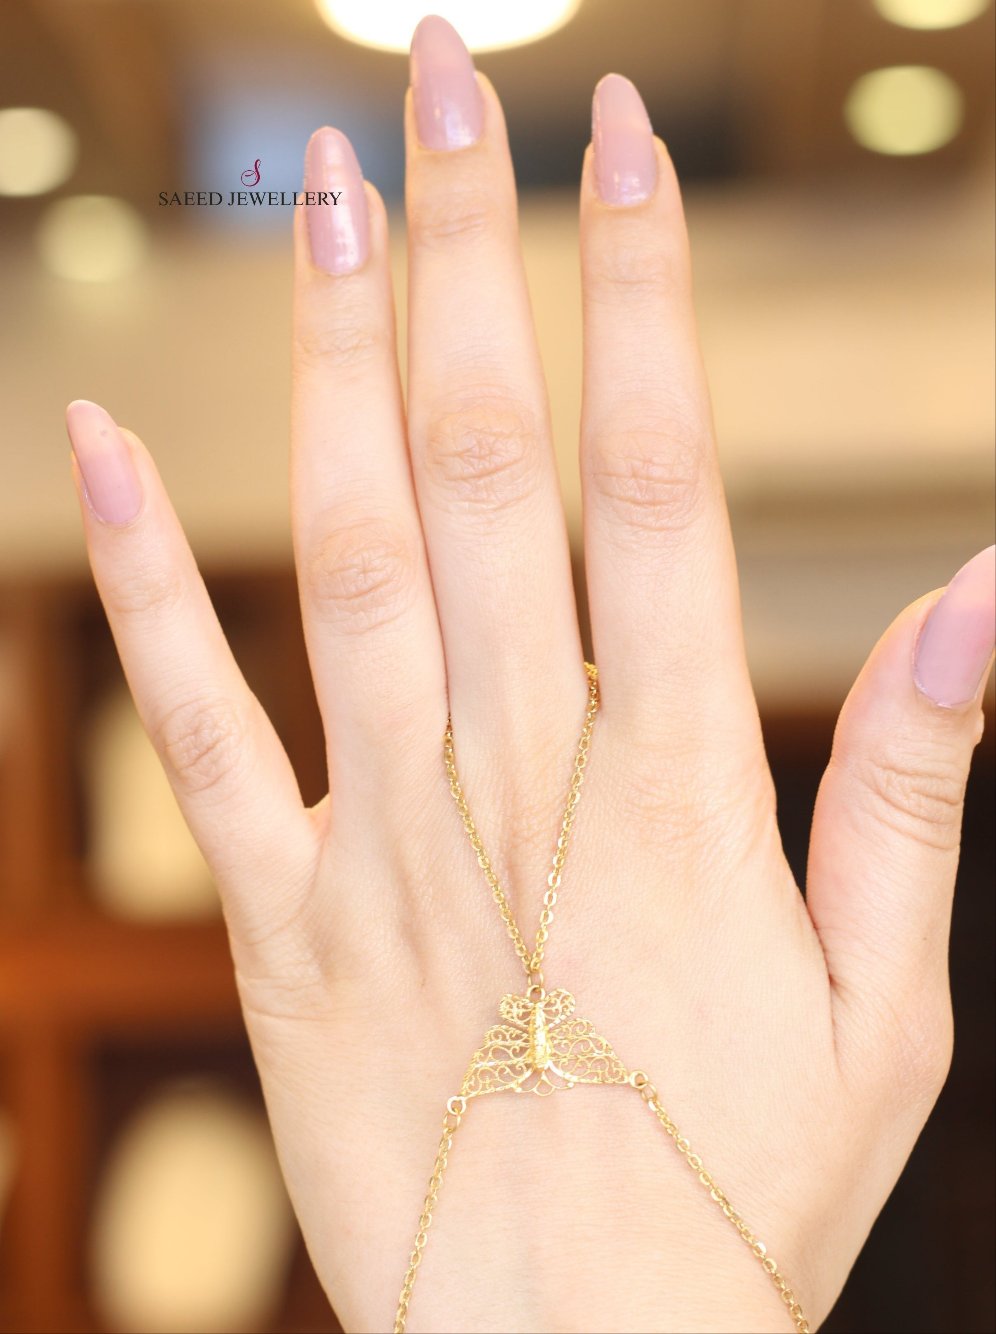 21K Gold Chain Hand Bracelet by Saeed Jewelry - Image 1